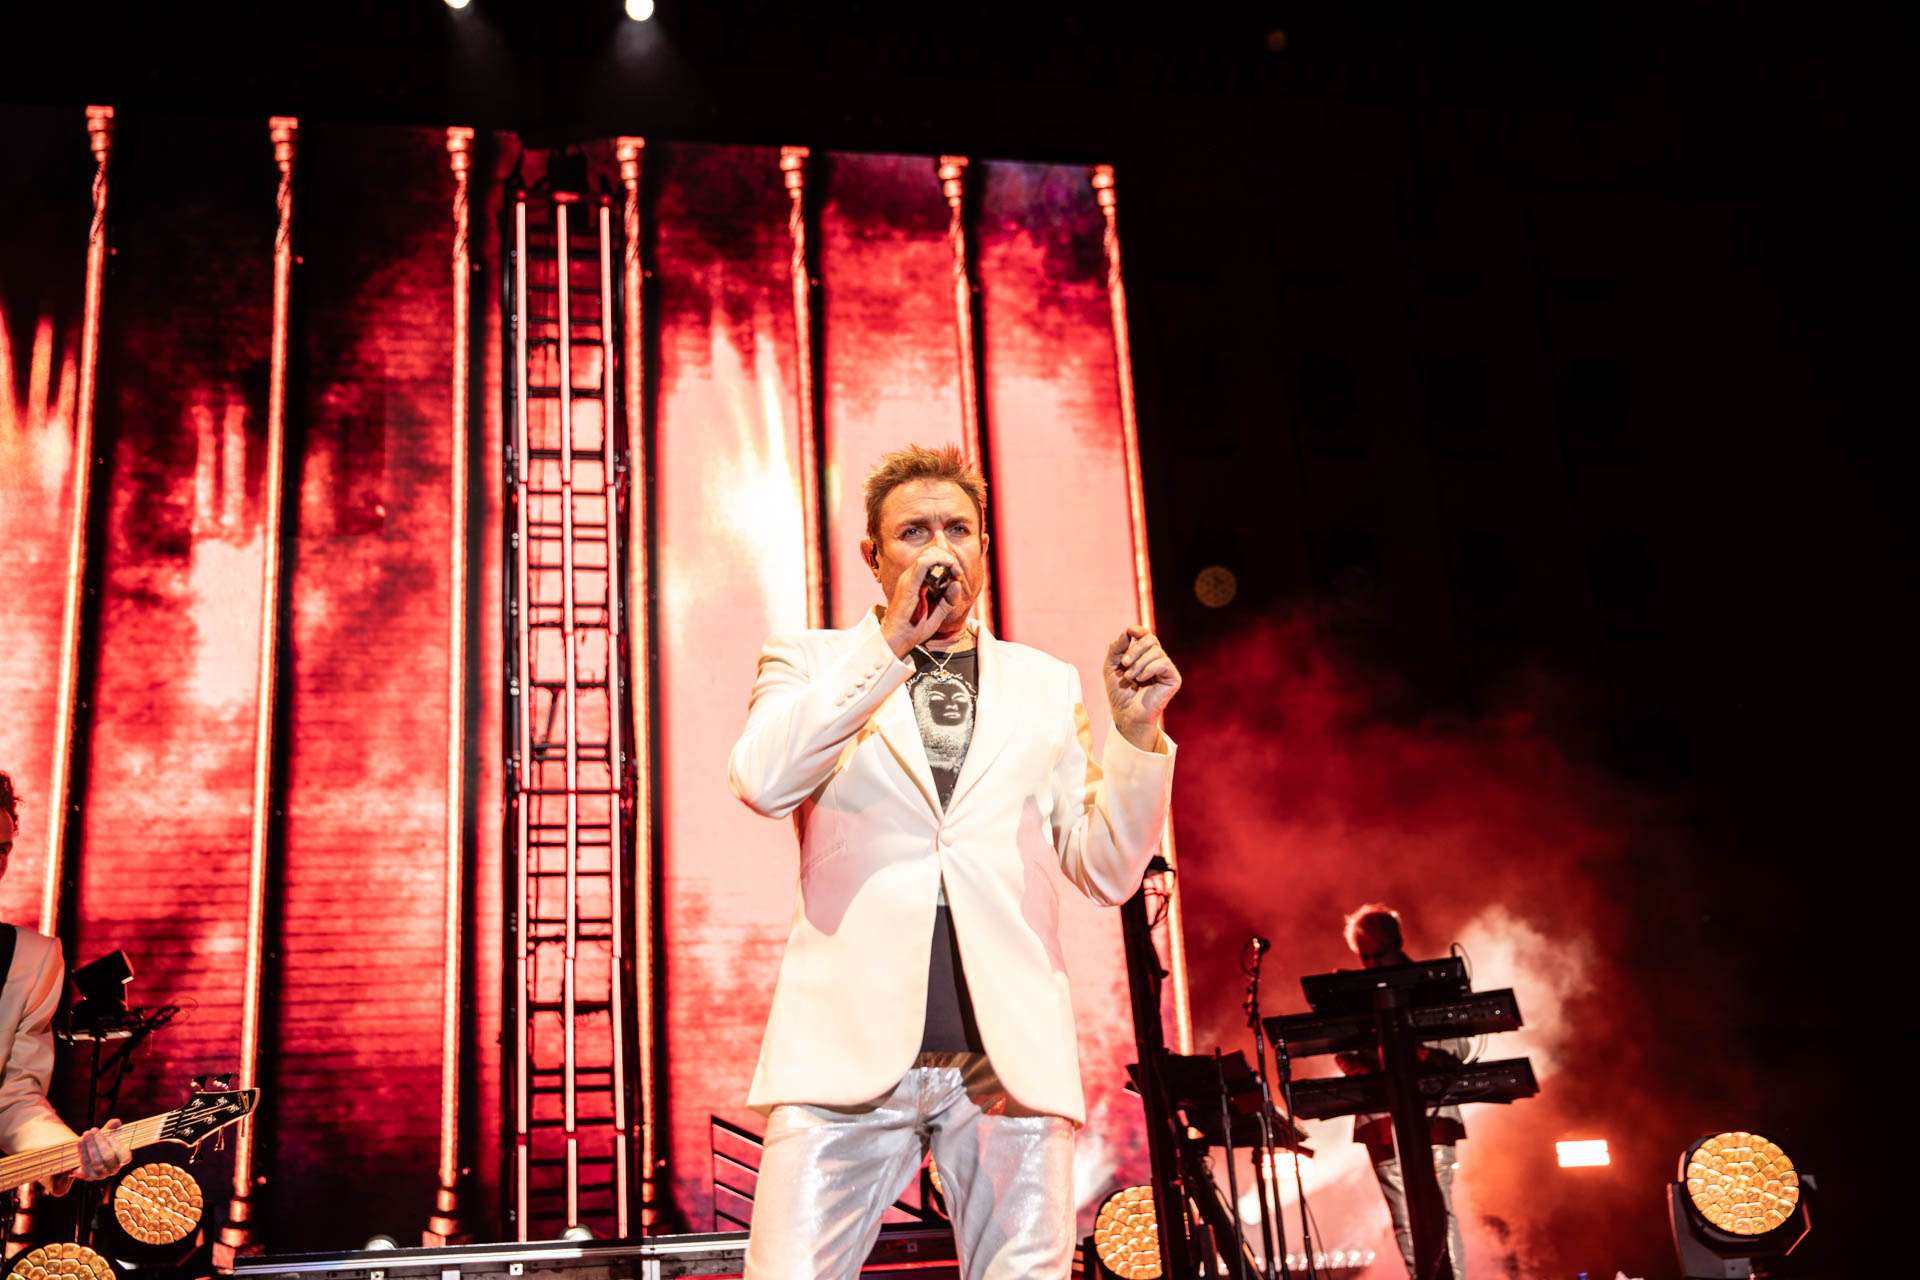 The Sound Of A Good Time: Duran Duran at Huntington Bank Pavilion [REVIEW] 3